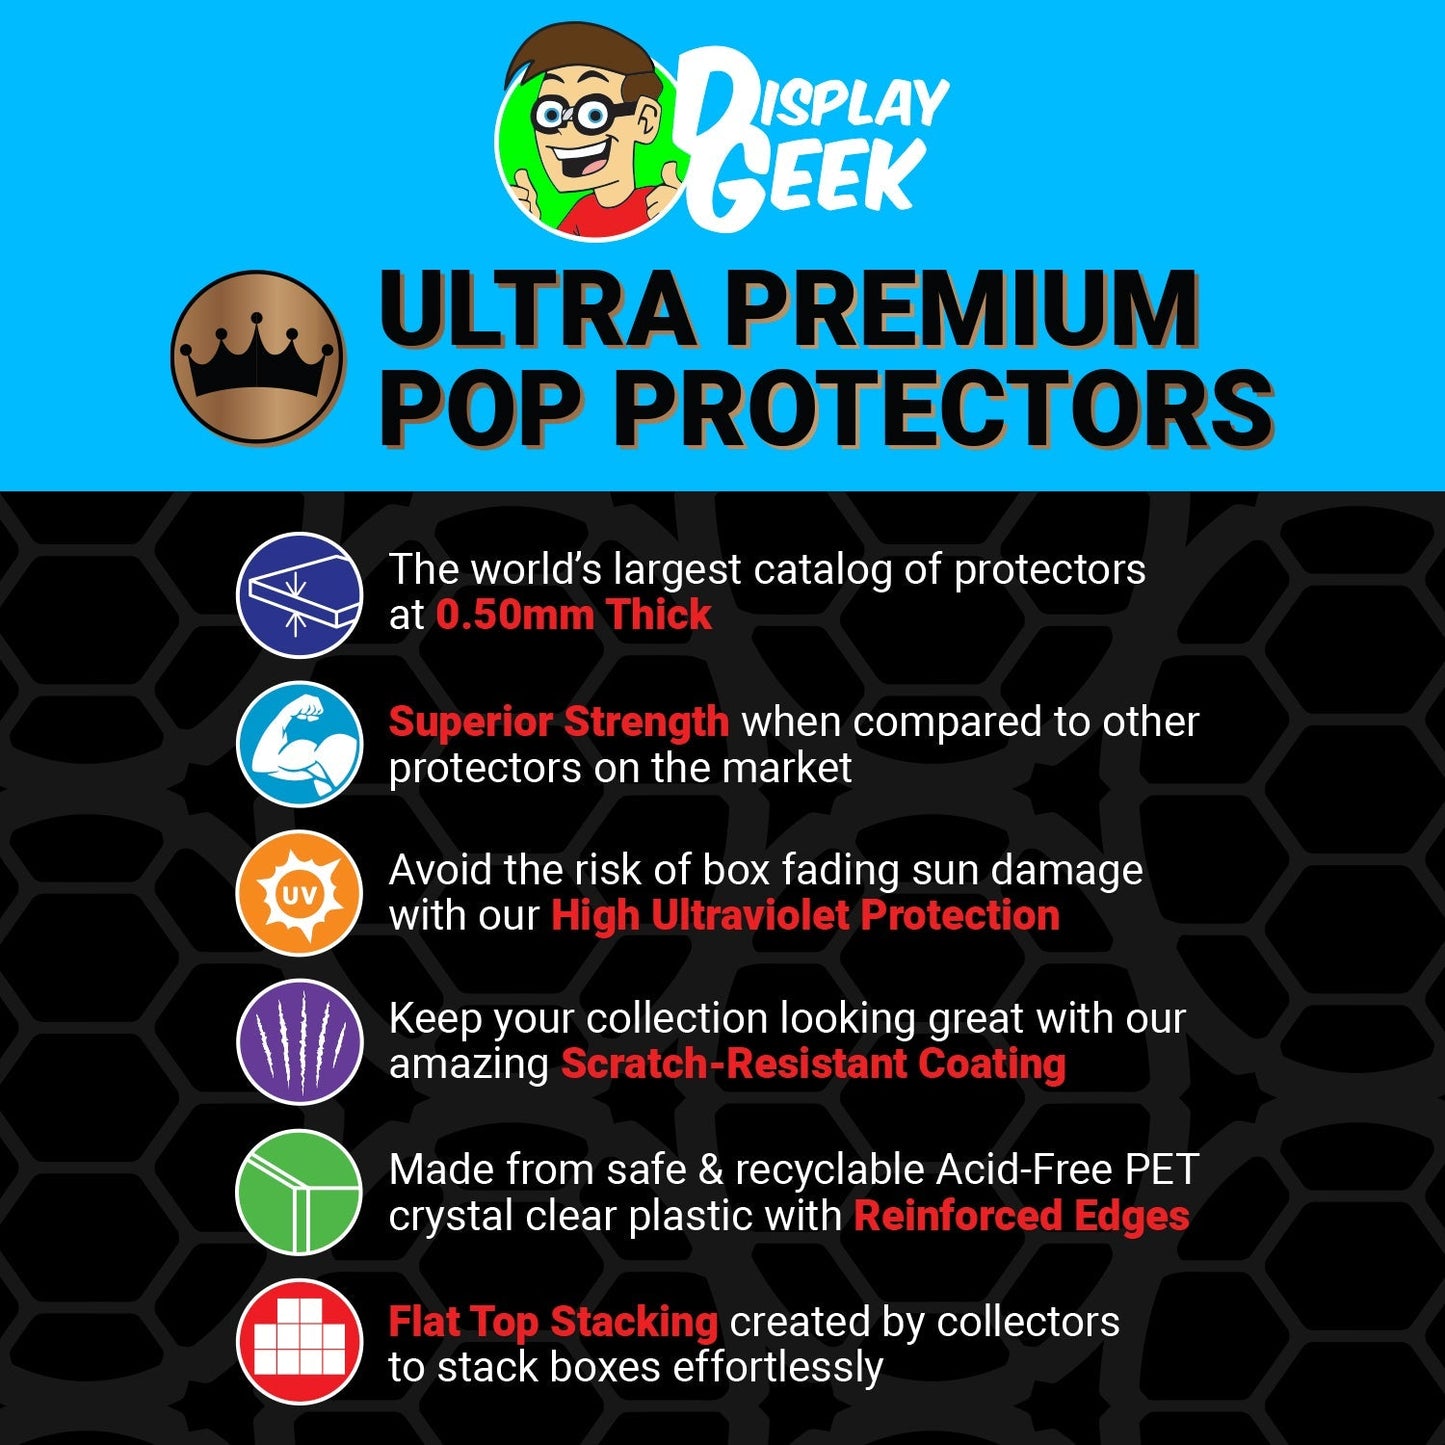 Pop Protector for Hawkeye #32 Funko Pop Comic Covers - PPG Pop Protector Guide Search Created by Display Geek